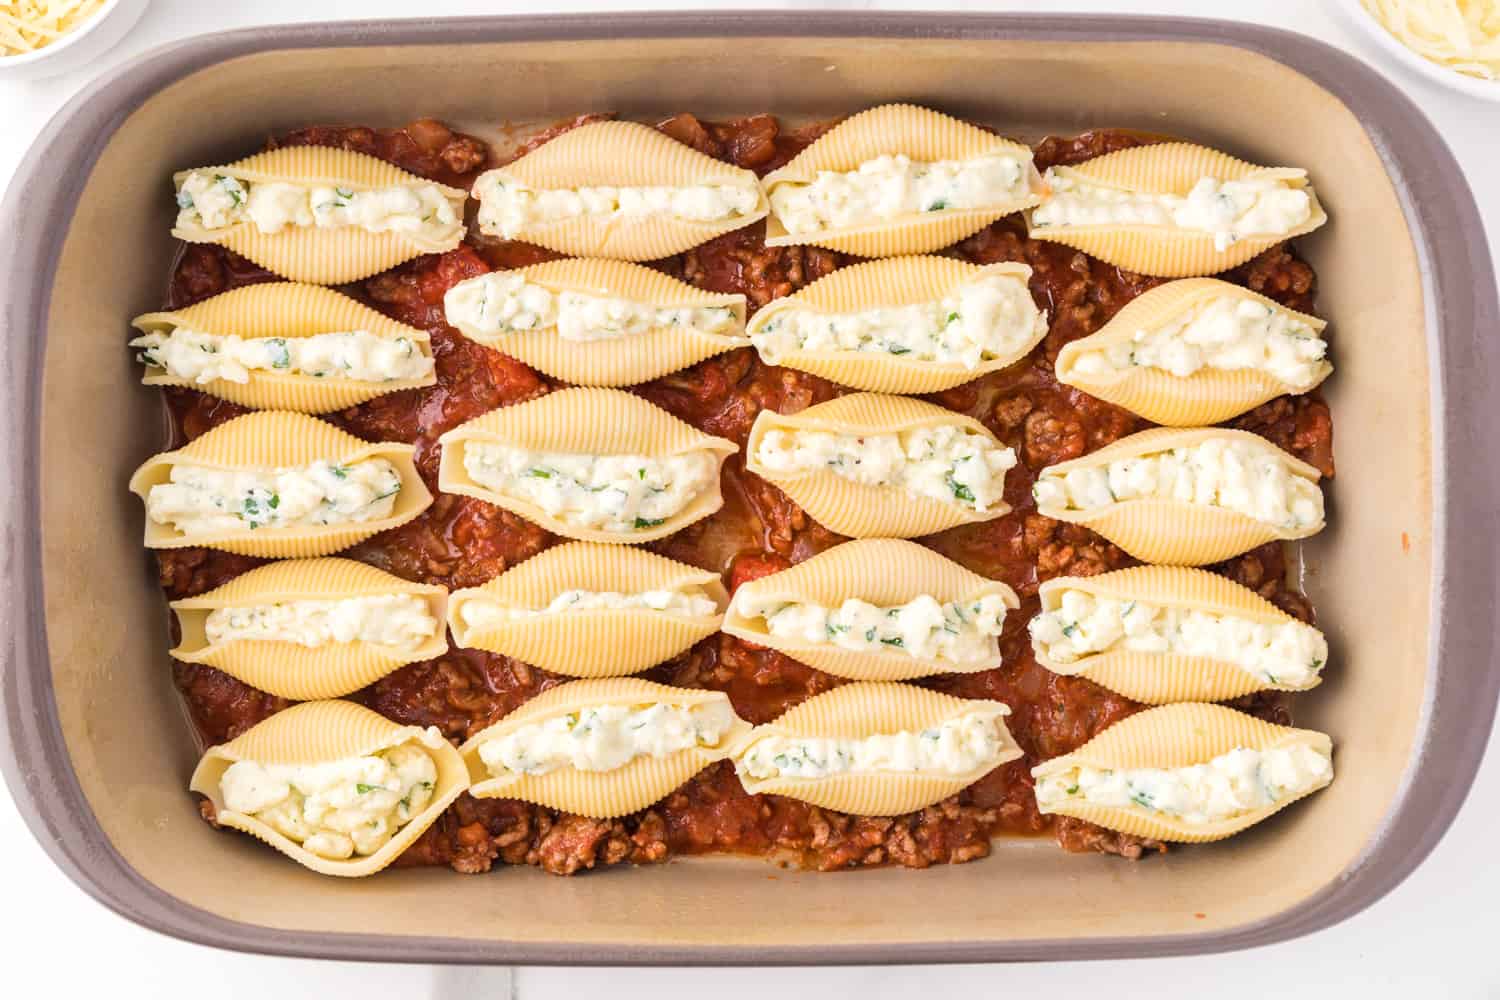 Stuffed shells added to layer of meat sauce.